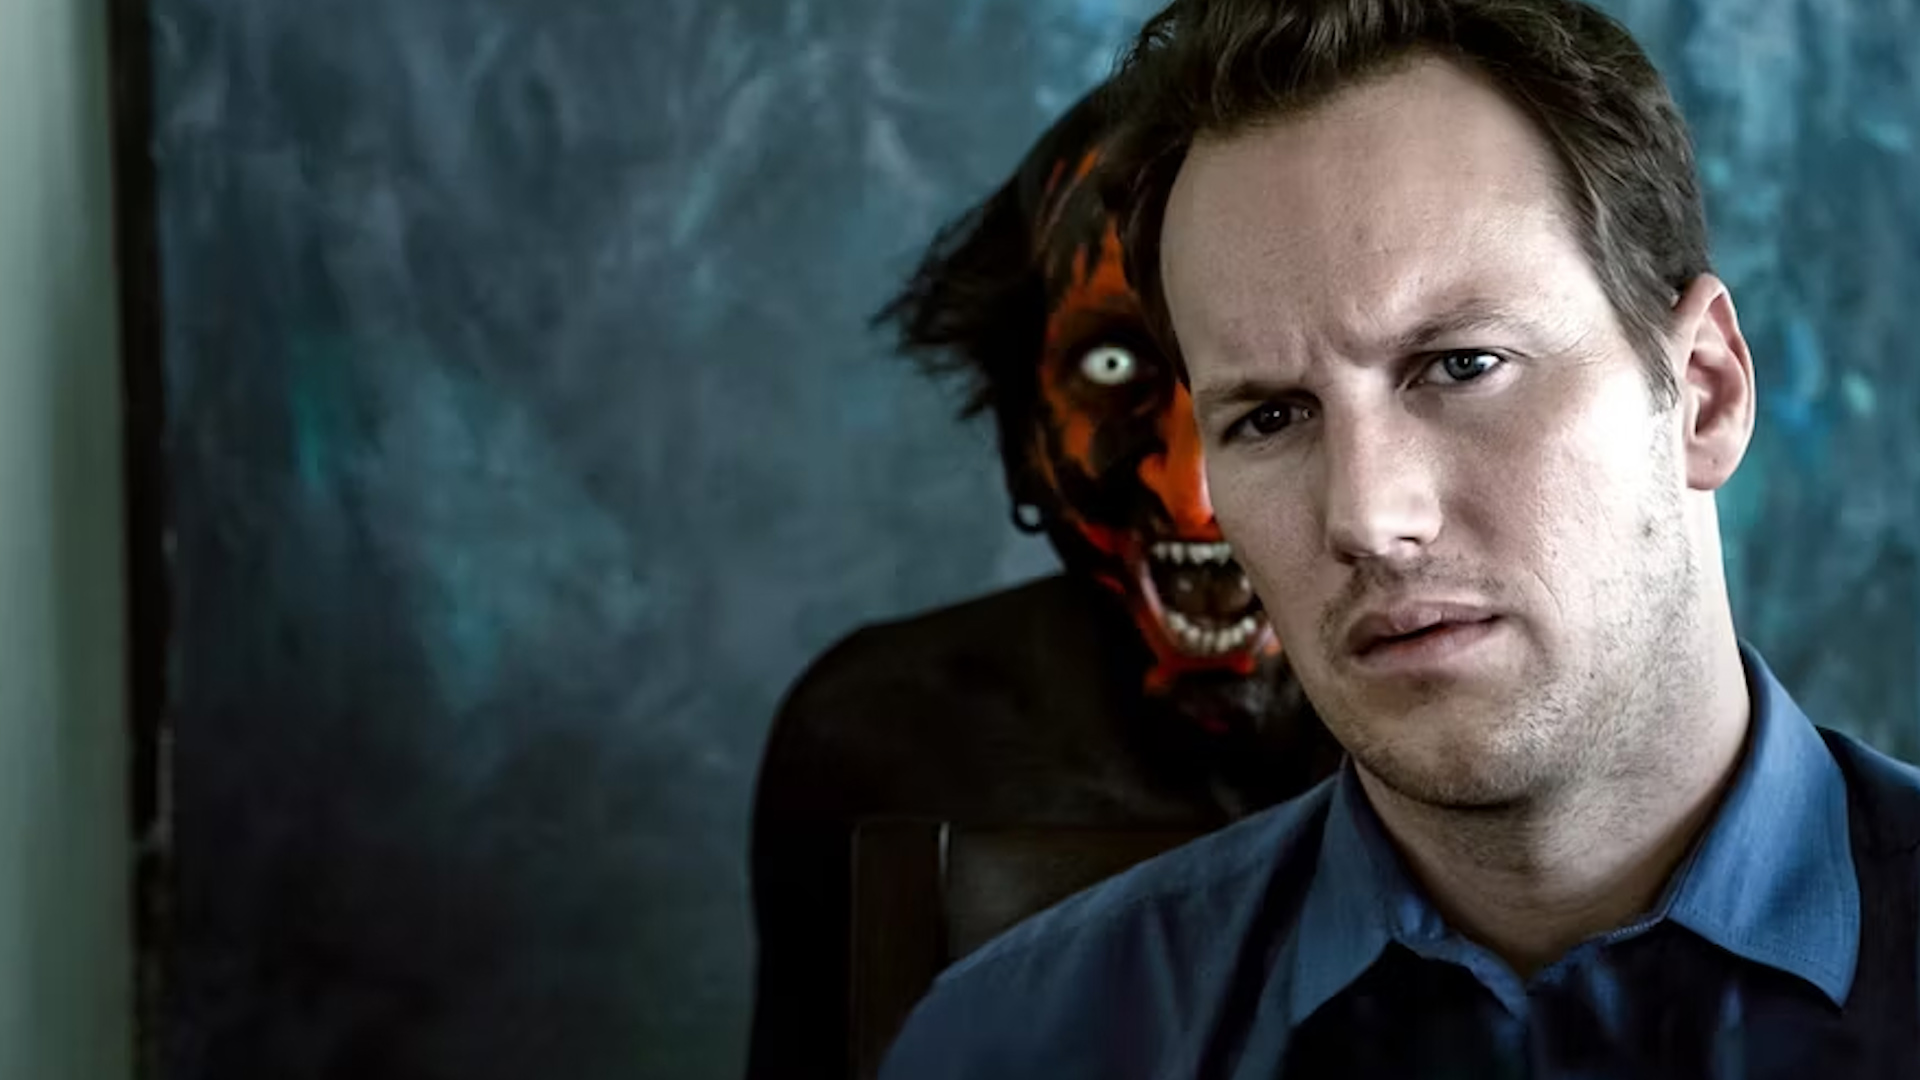 patrick wilson being haunted by a red and black demon, positioned ominously behind him